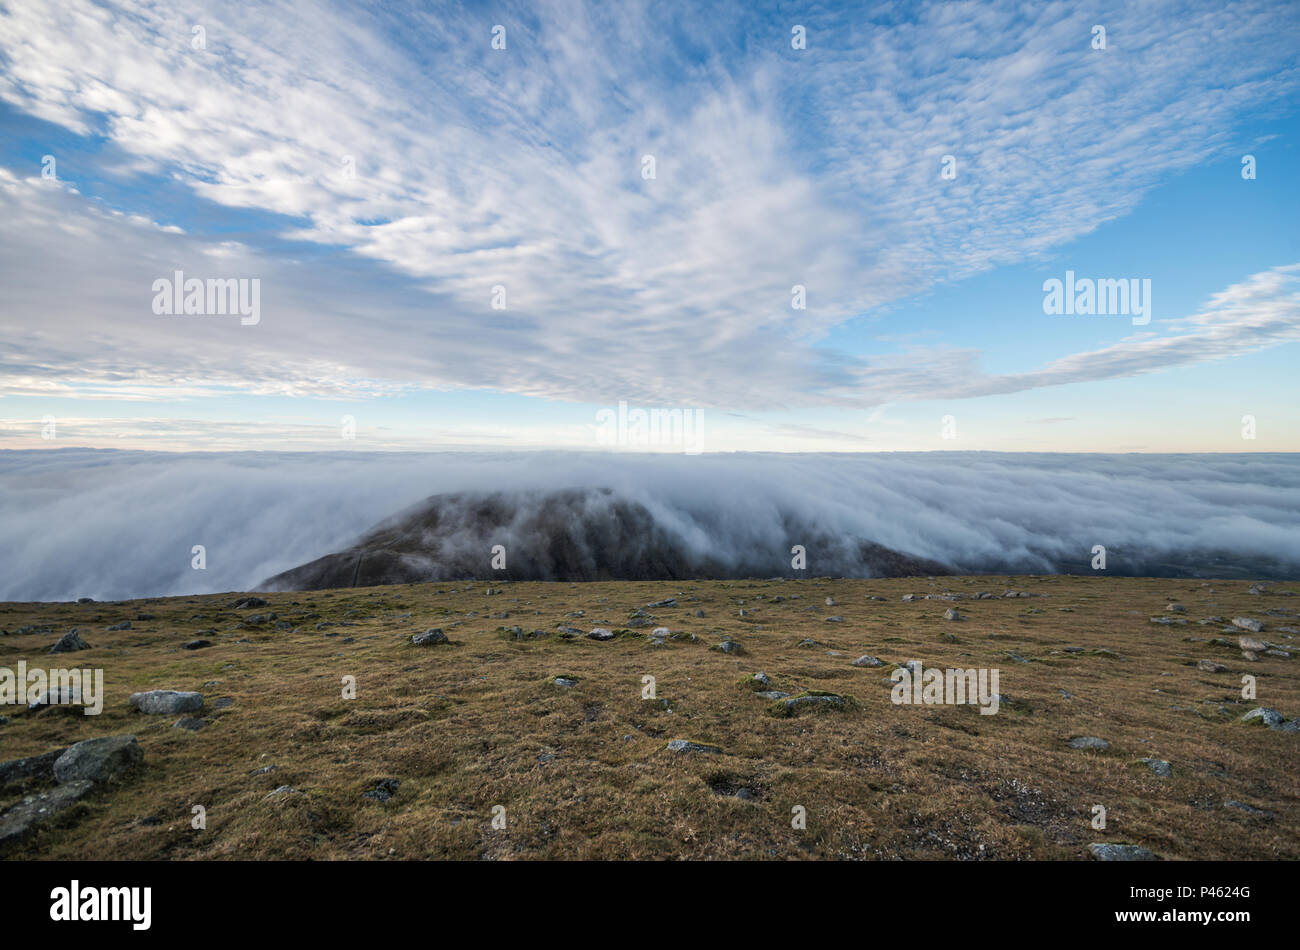 A gorgeous view from Slieve Donard with low lying clouds. Stock Photo